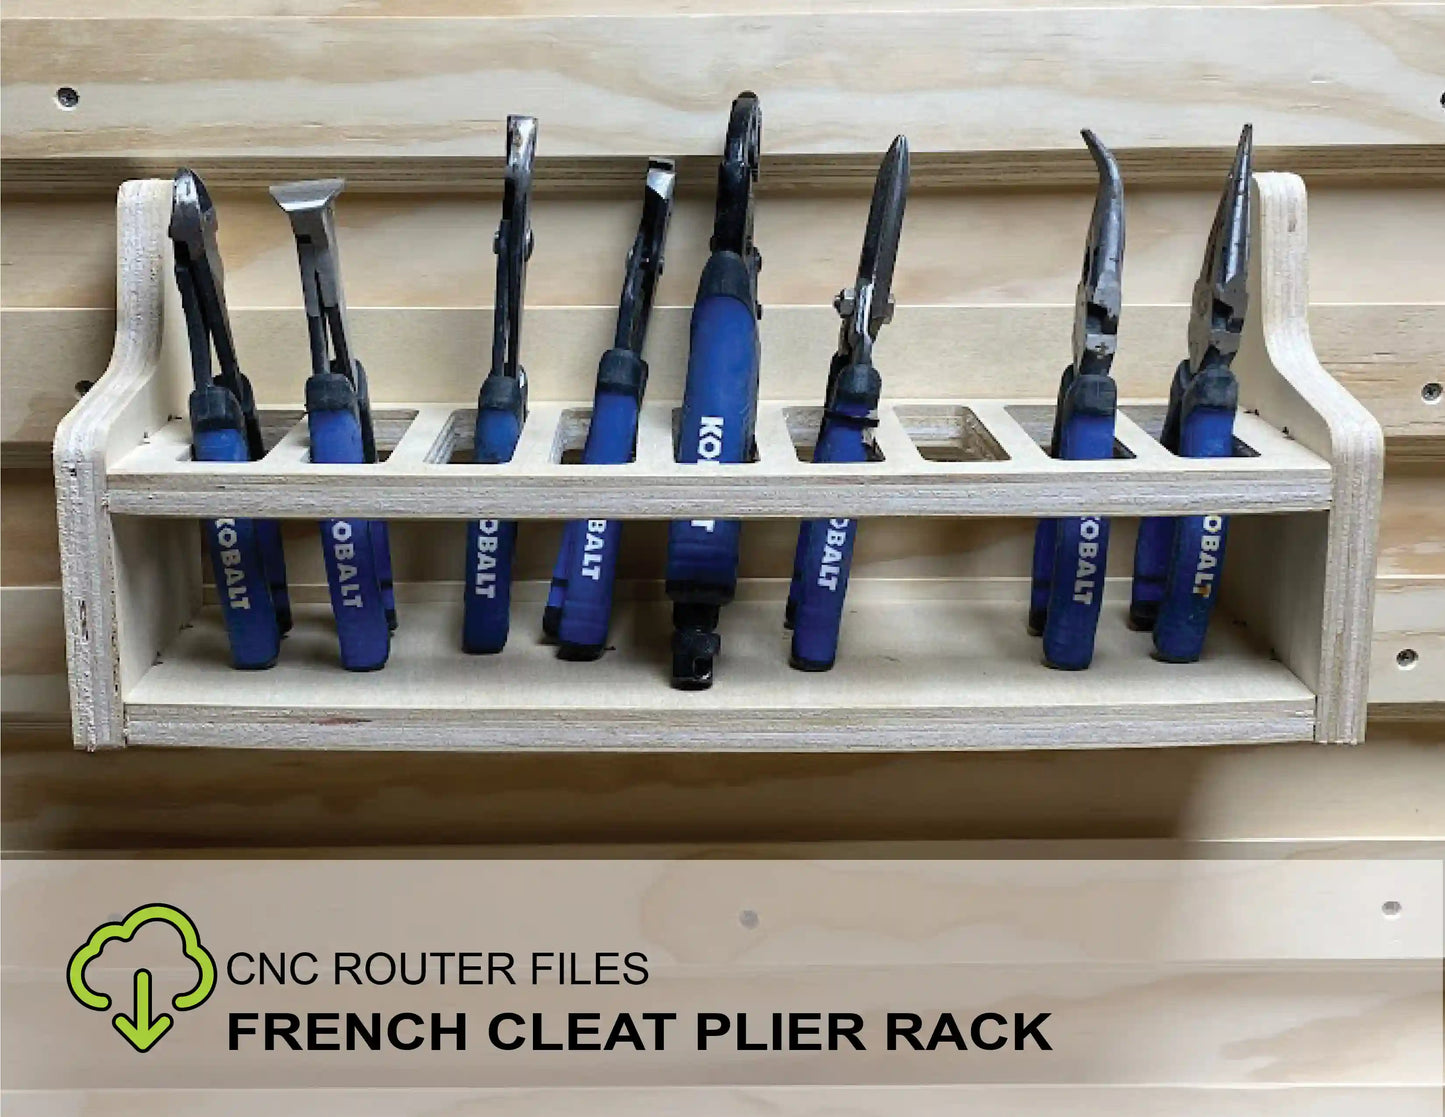 CNC Router Files French Cleat Plier Storage Rack